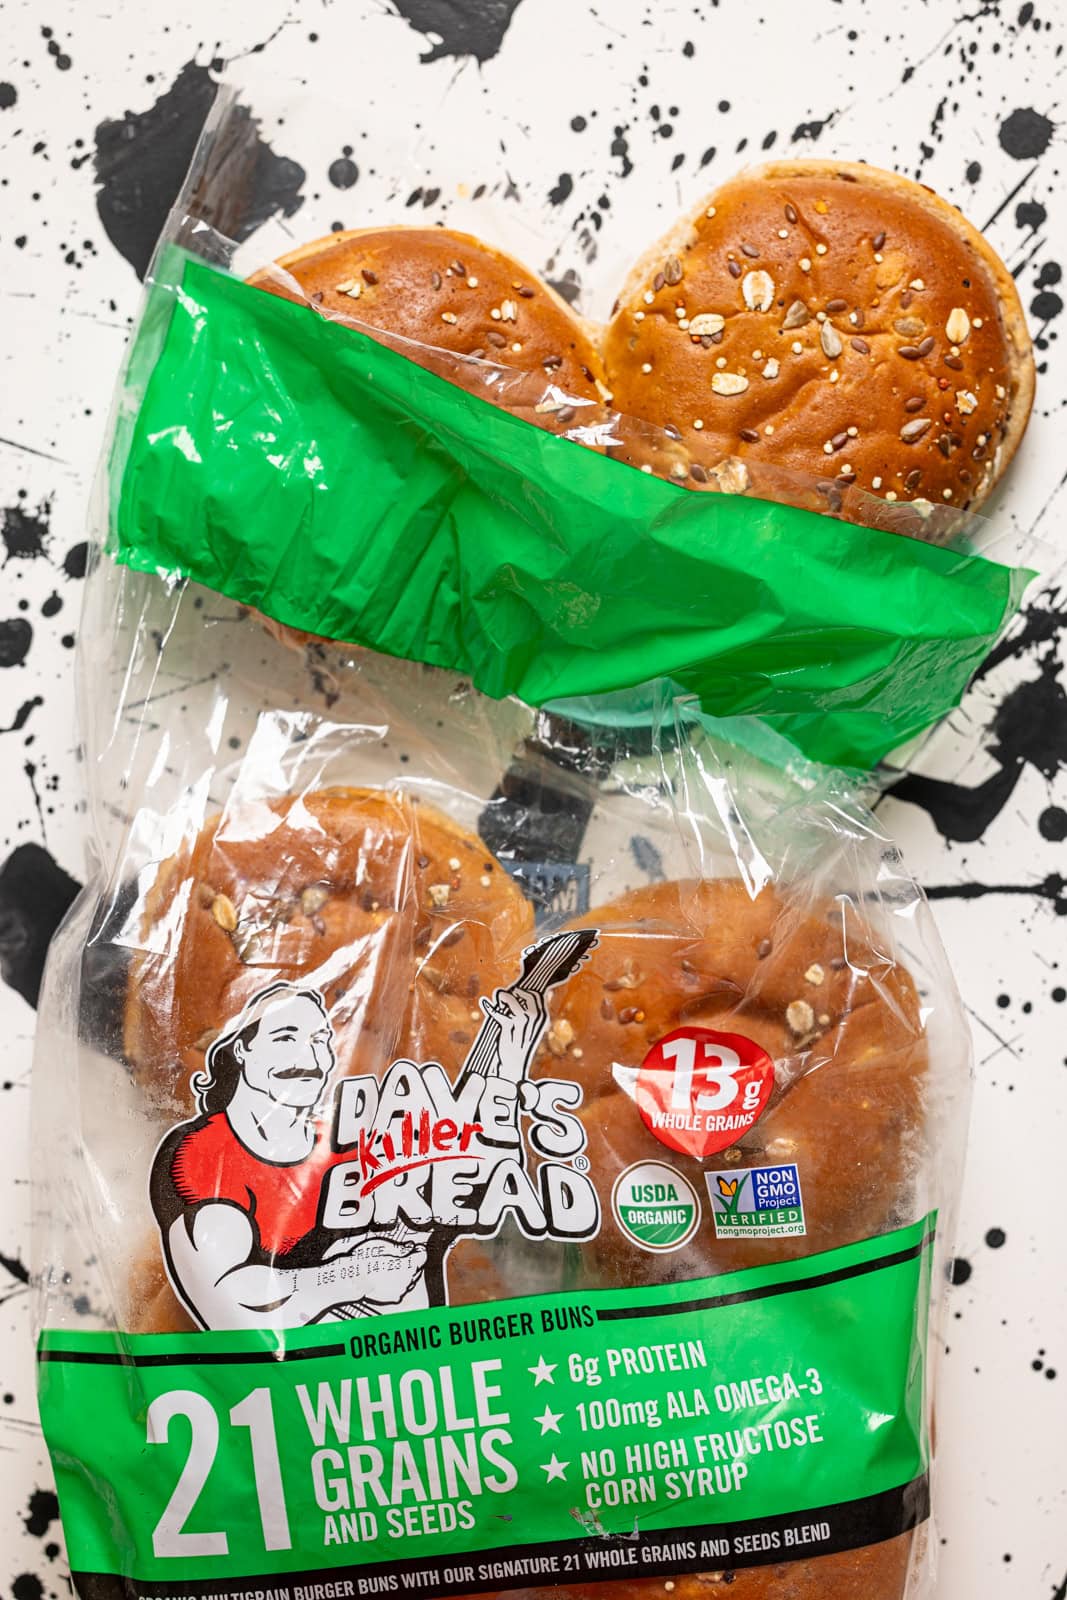 Burger buns in a bag on a white + black spot table.